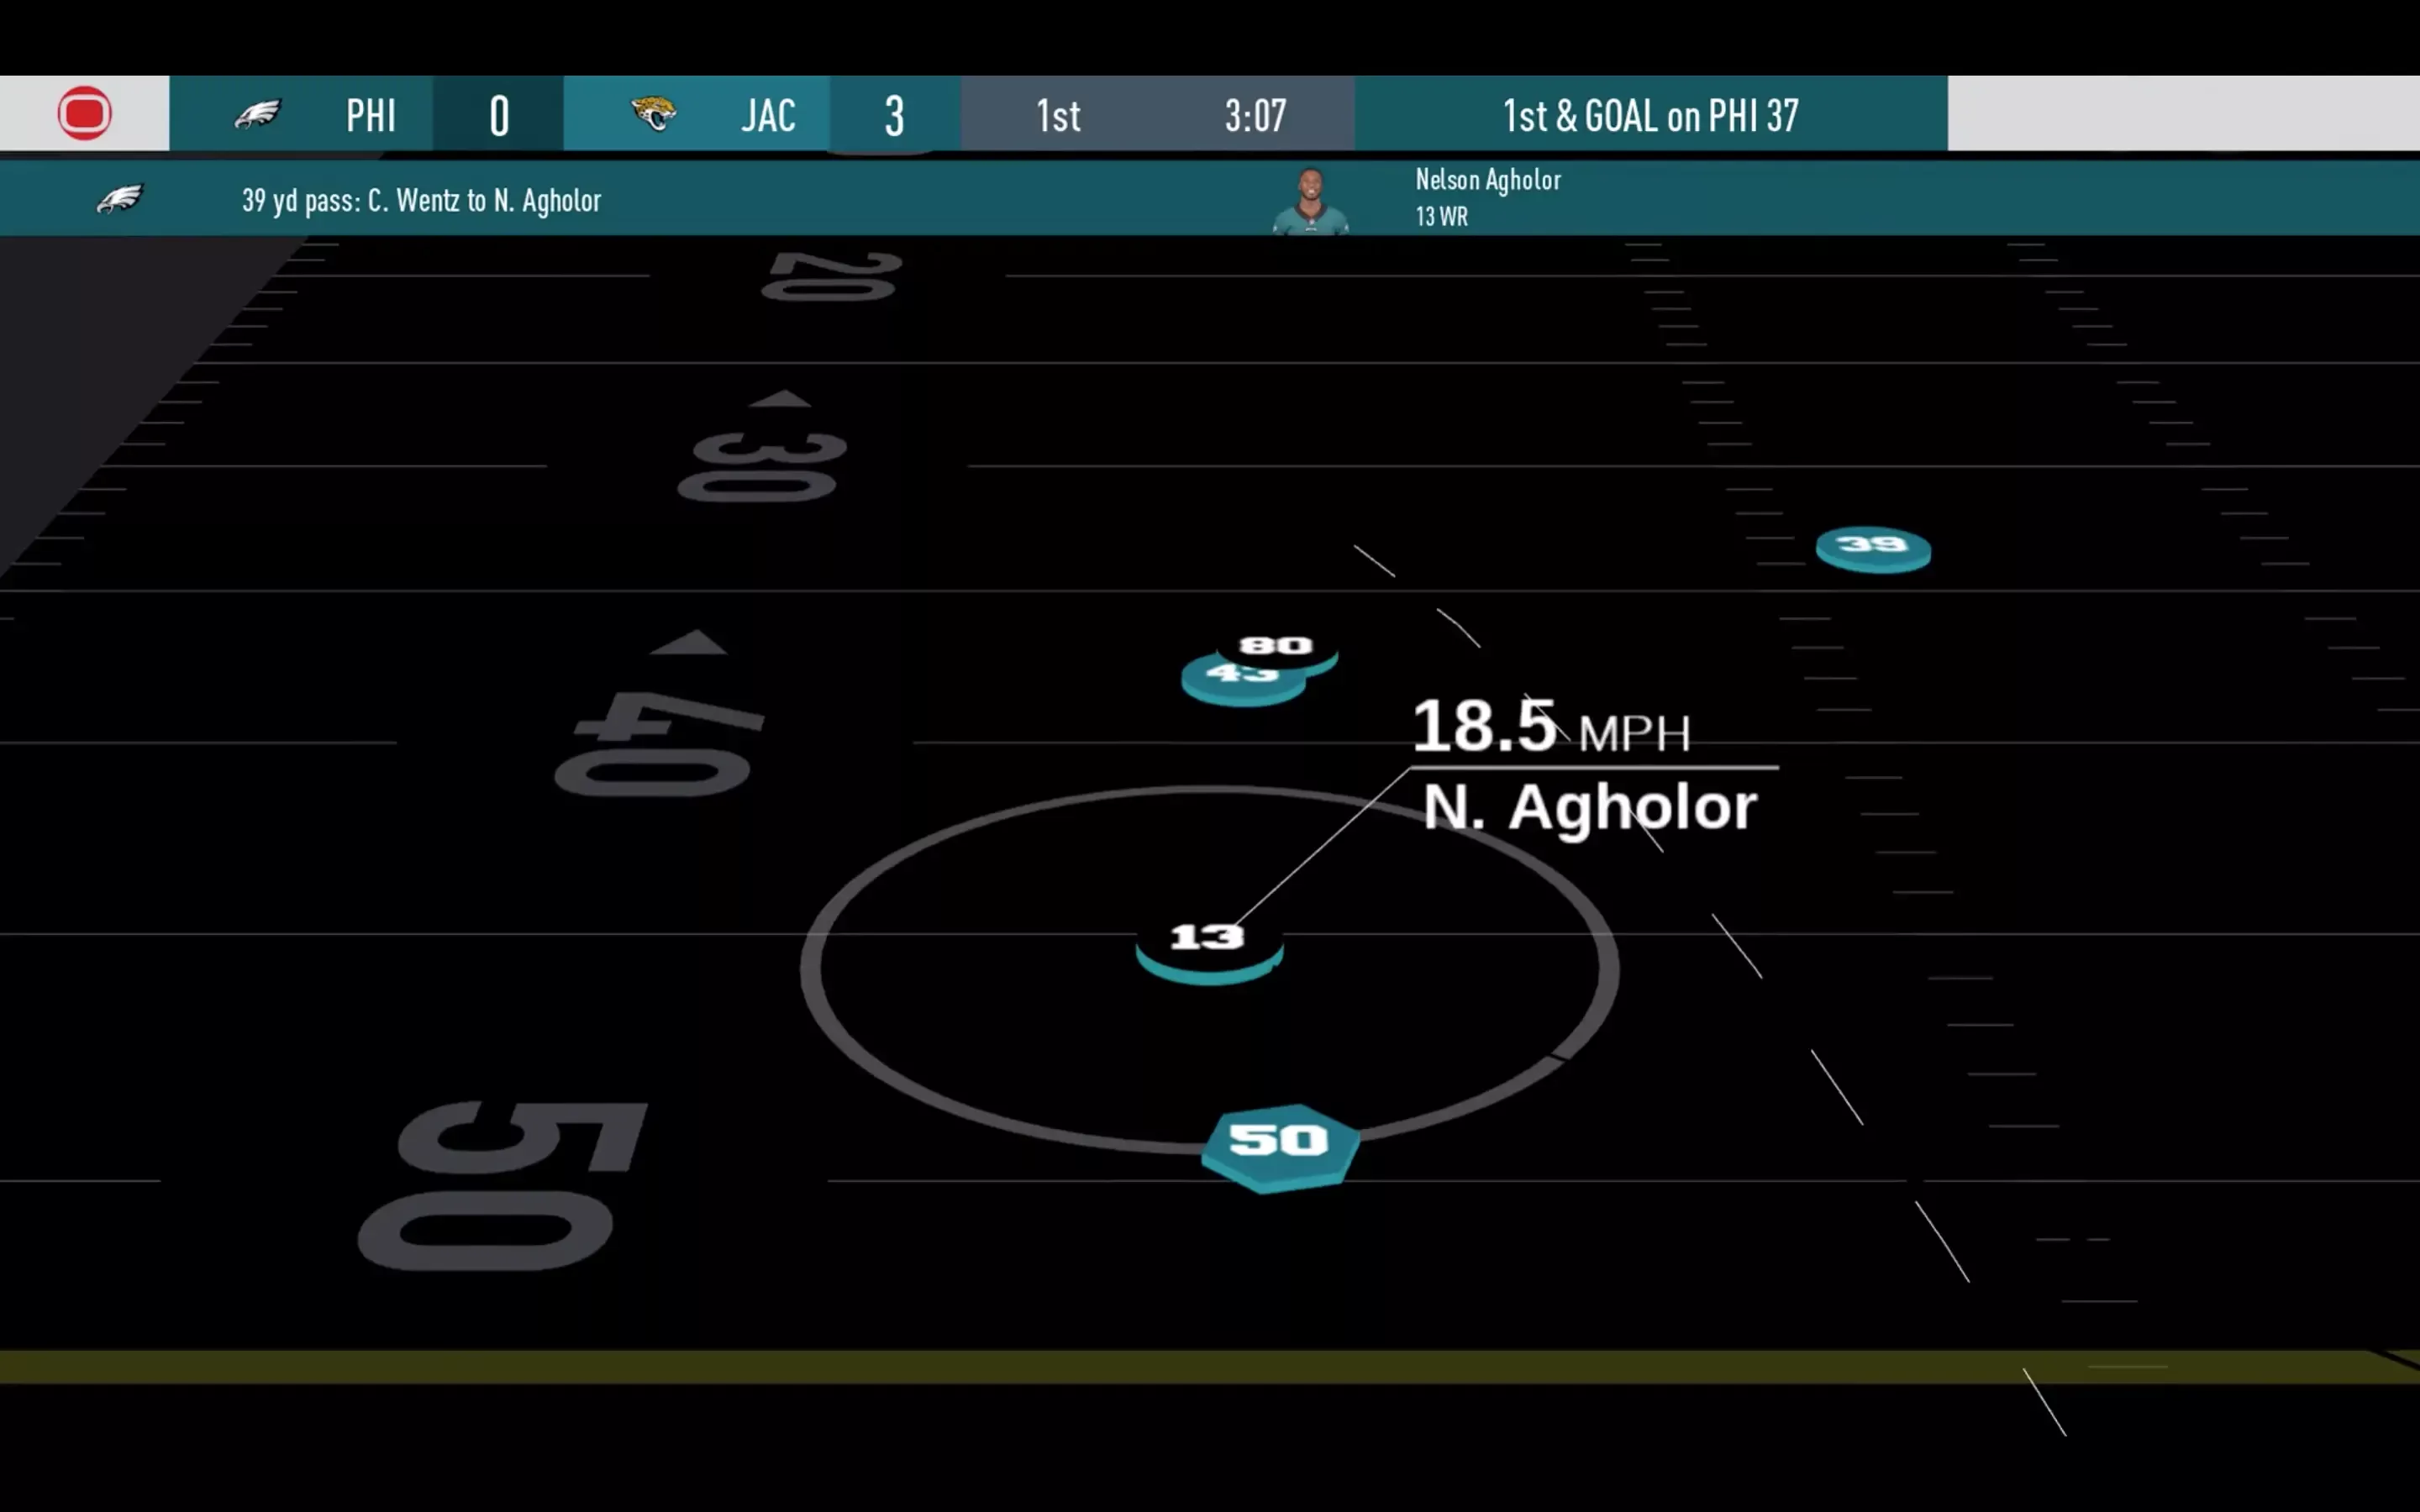 A screenshot of a replay from a Eagles vs Jags game.